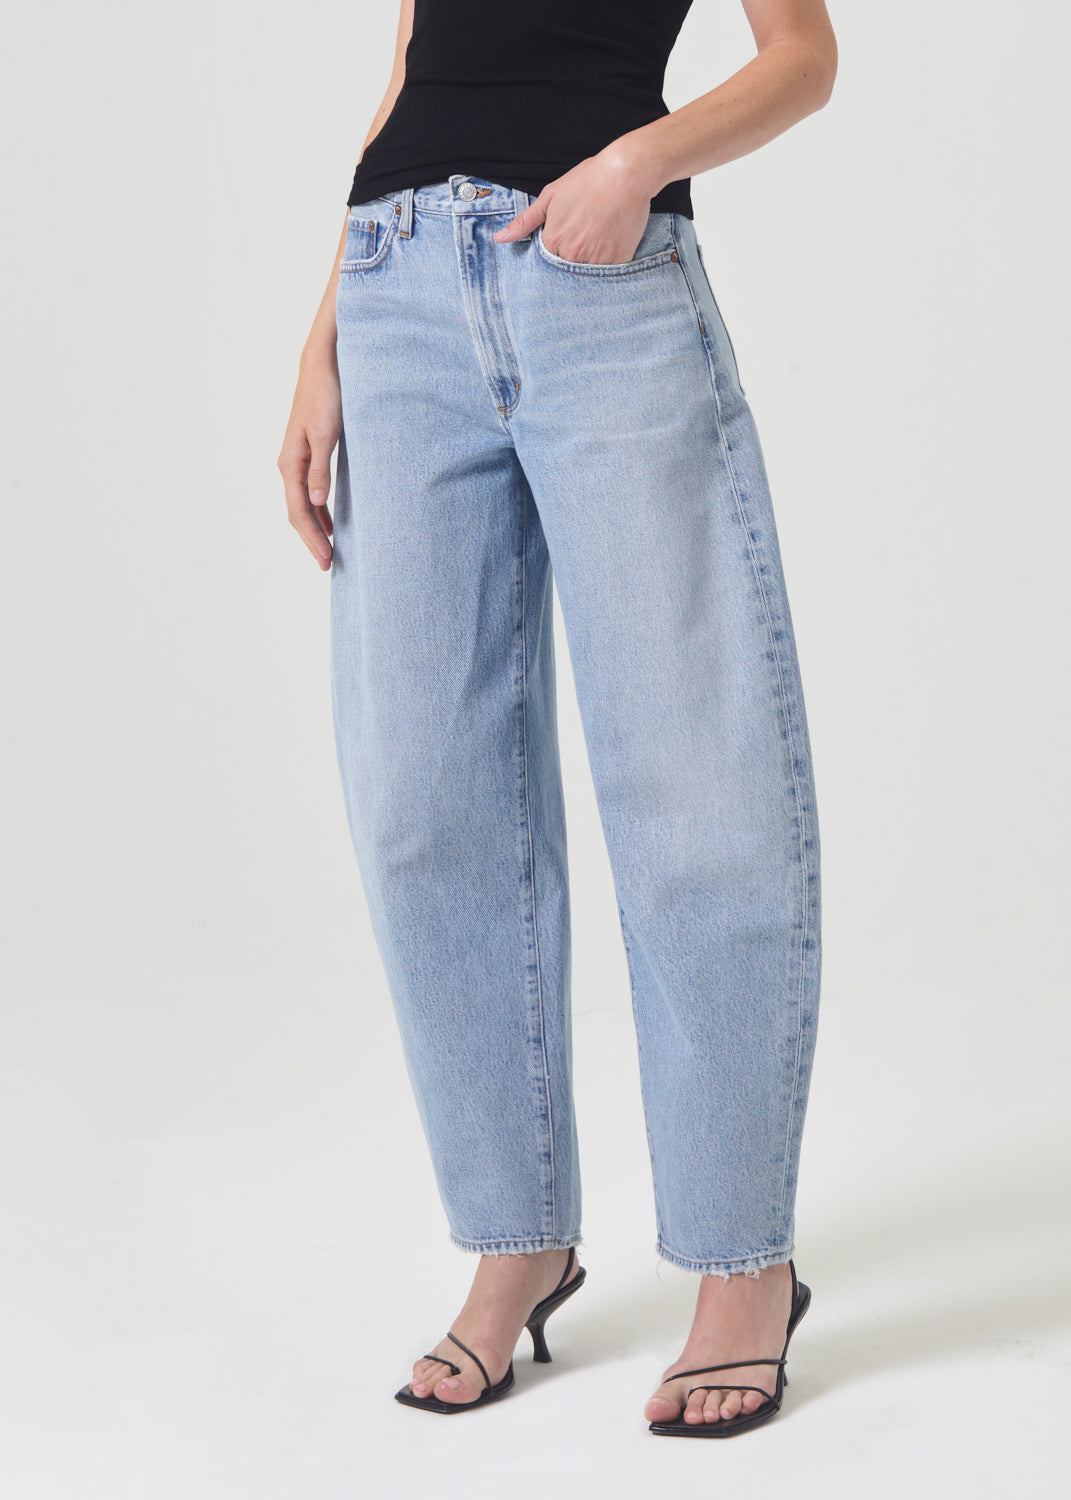 The Agolde Balloon Ultra High Rise Curved Jean in Conflict available at The New Trend Australia